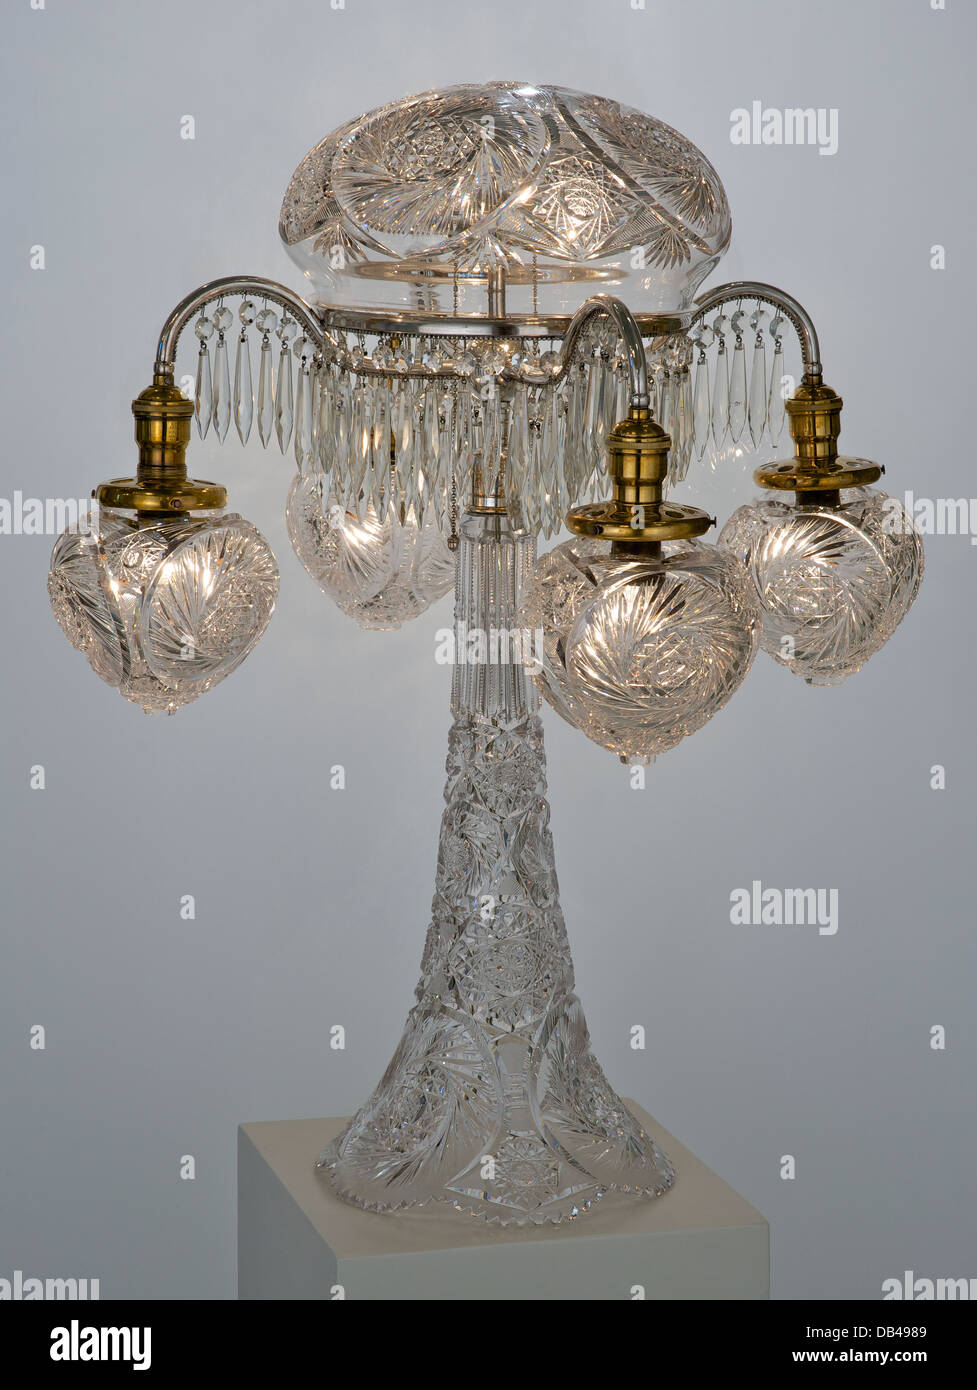 Cut glass electric table lamp Stock Photo